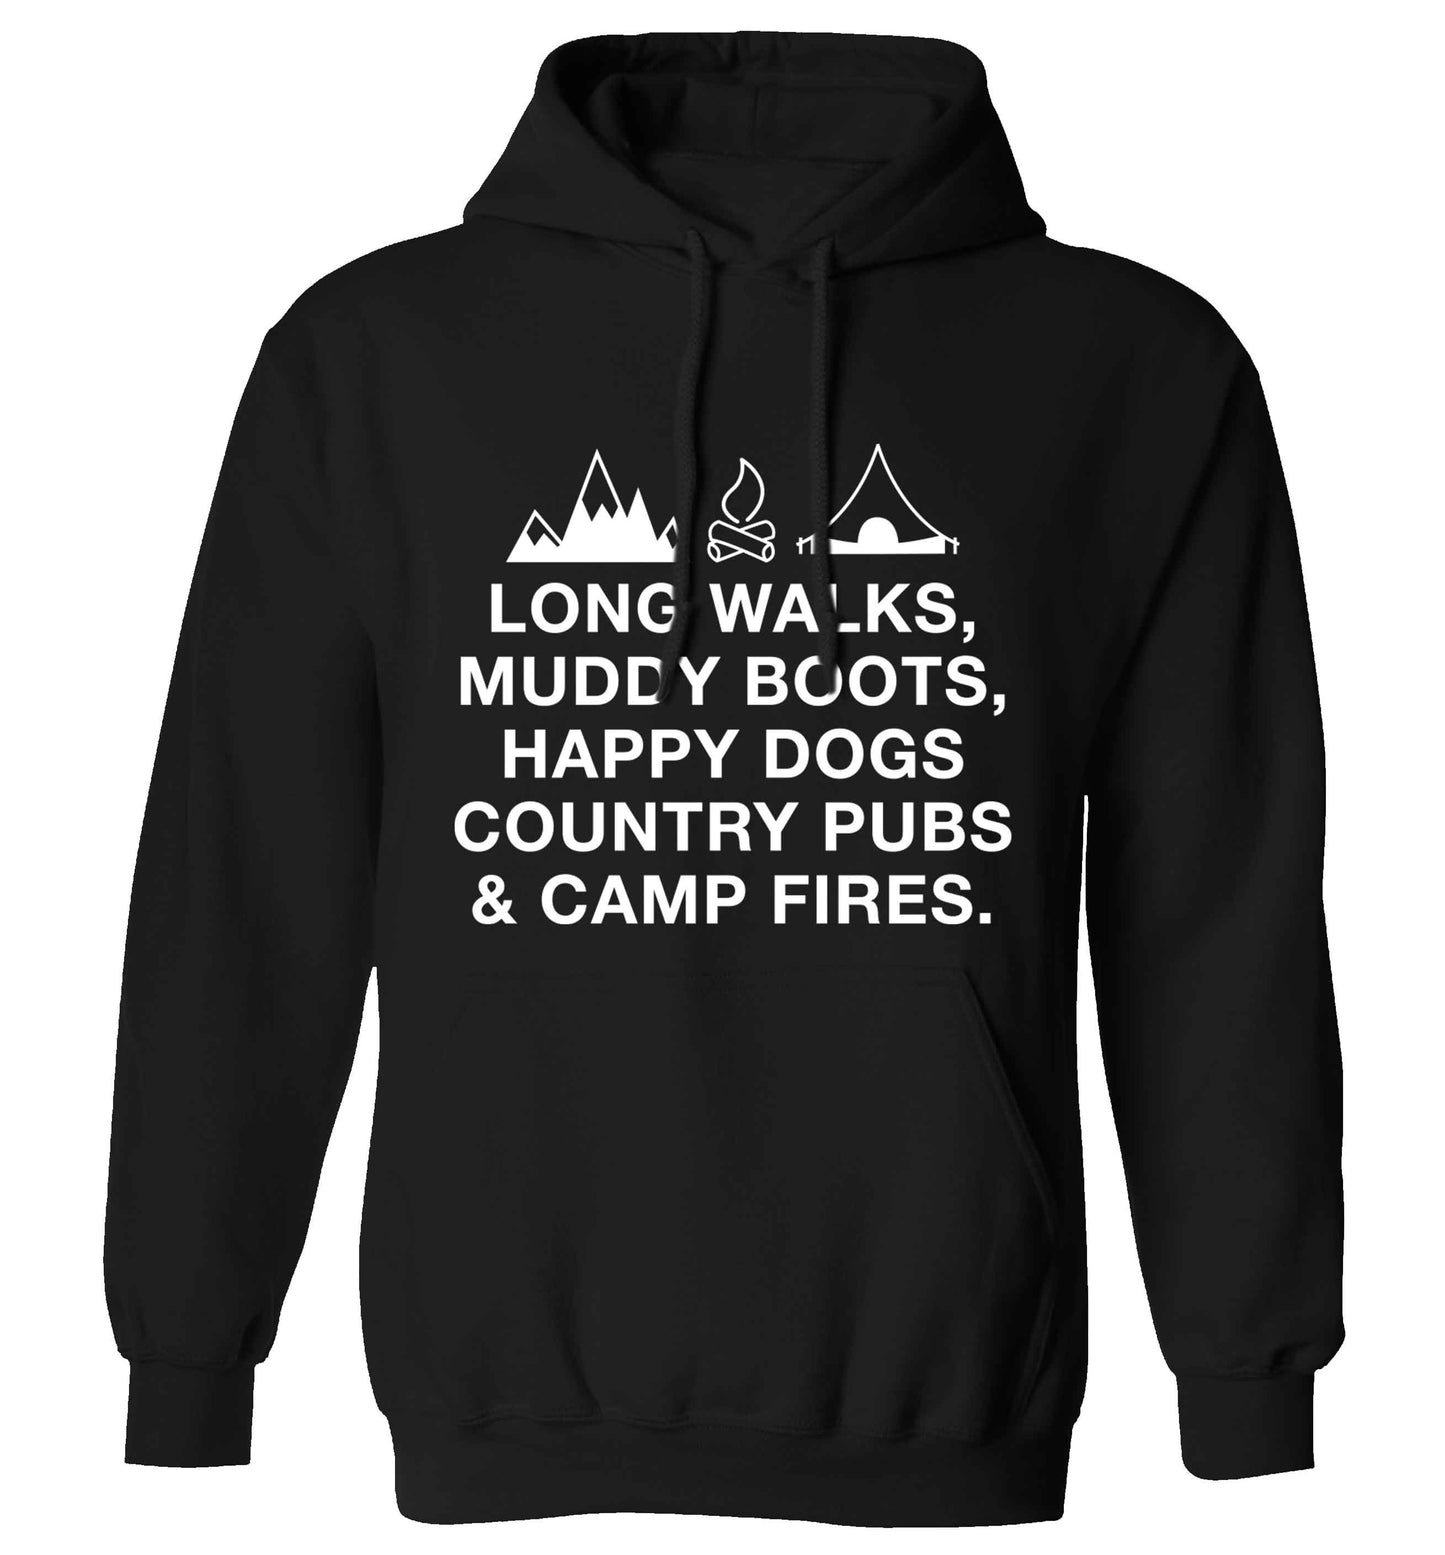 Long walks muddy boots happy dogs country pubs and camp fires adults unisex black hoodie 2XL